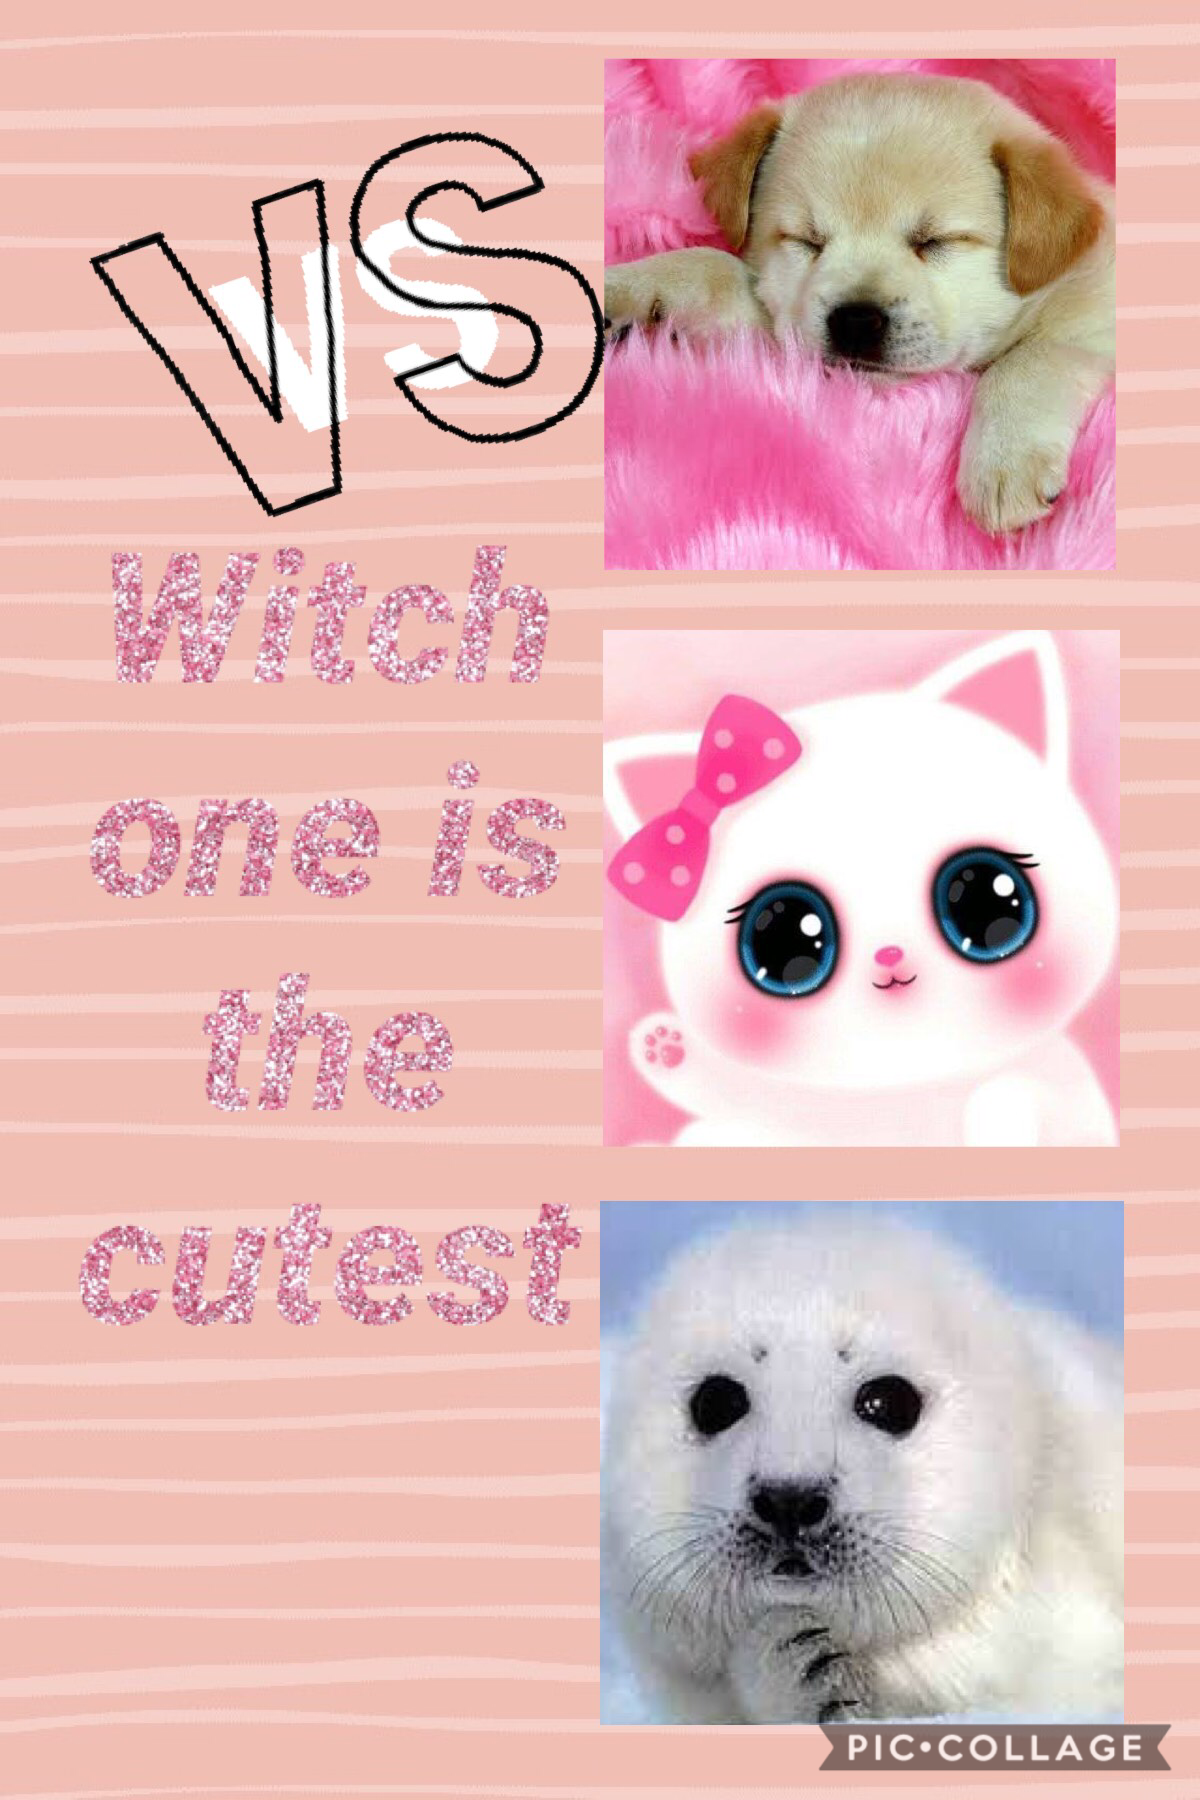 Witch one do you think is the cutest???